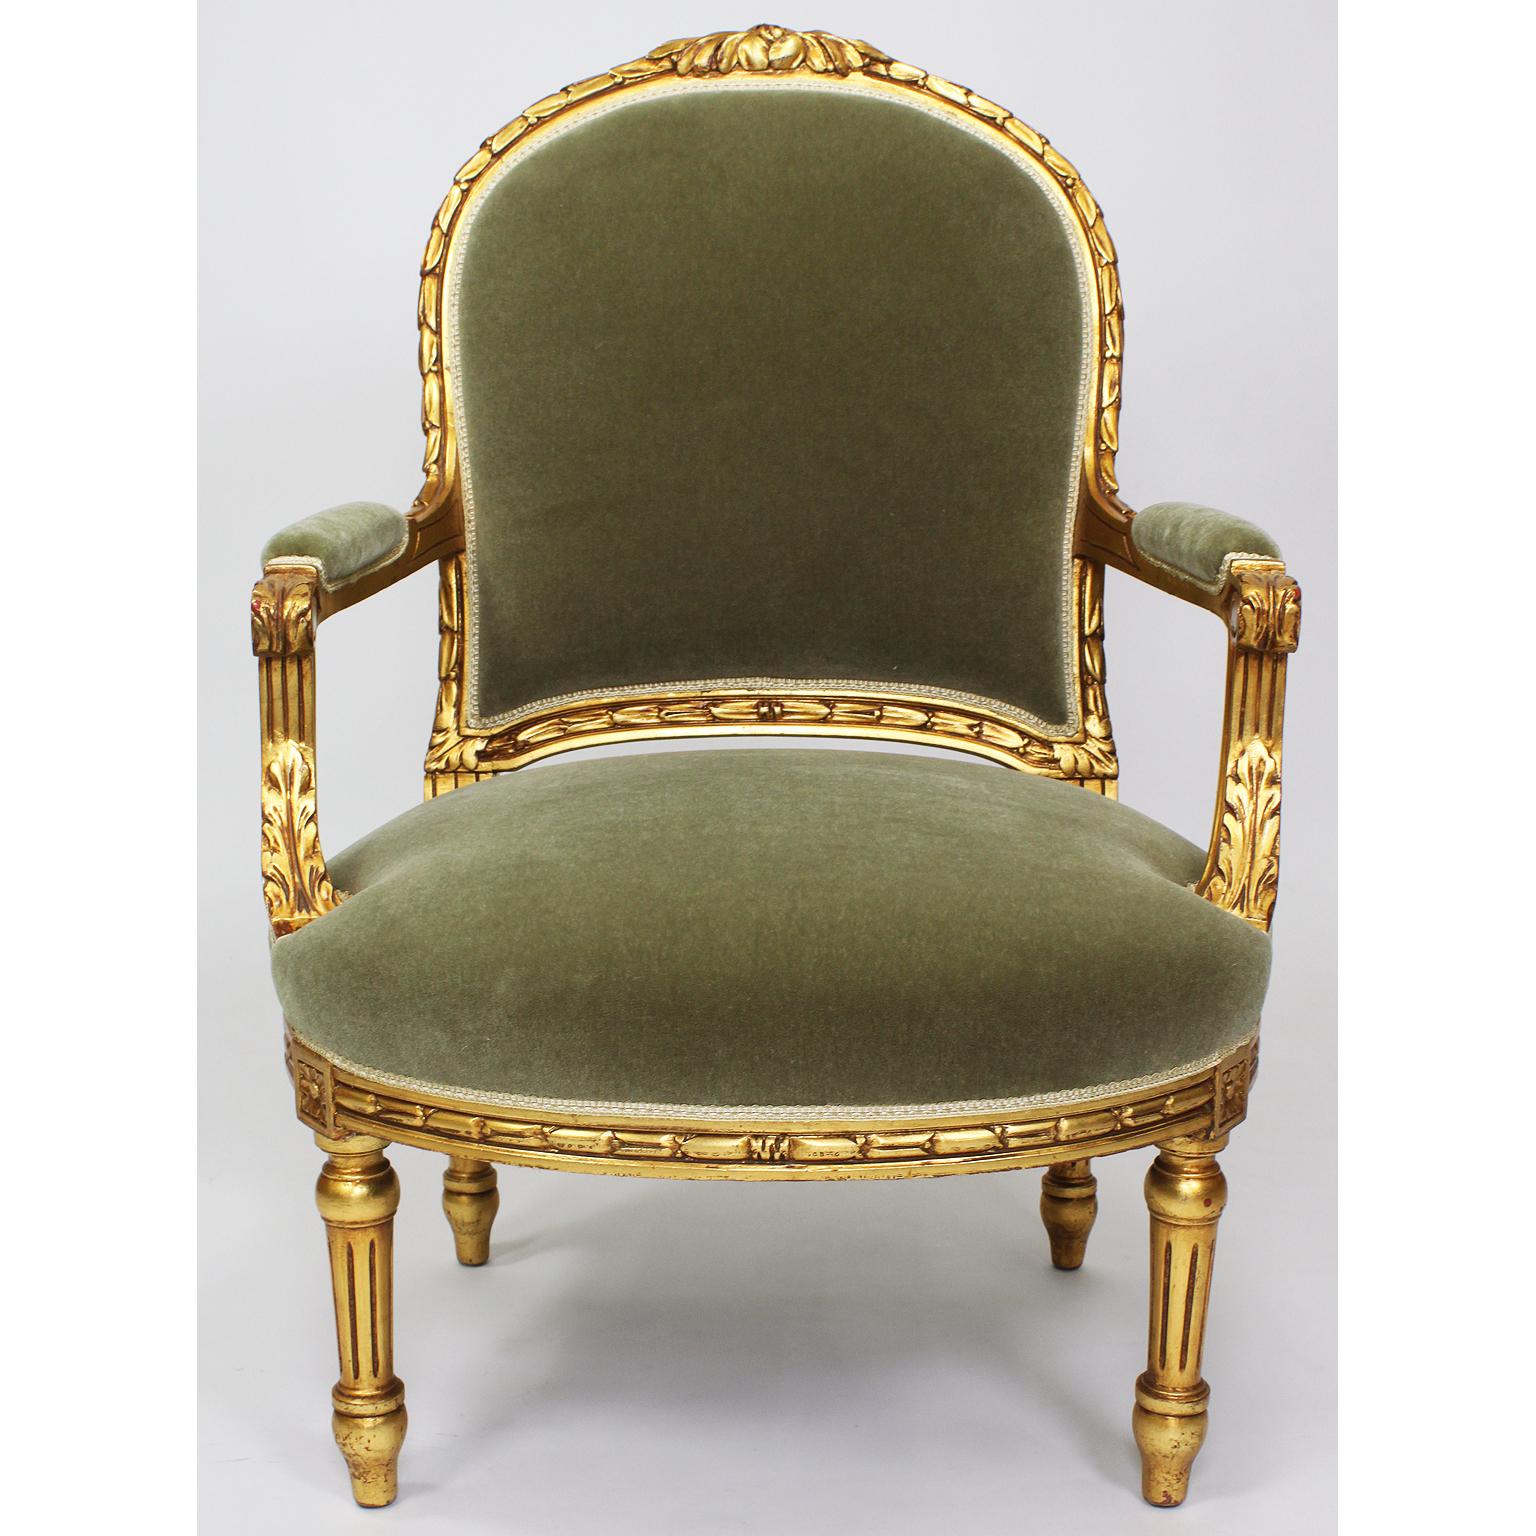 Five Piece French Louis XVI Style Giltwood Carved Salon 'Parlor' Suite 1